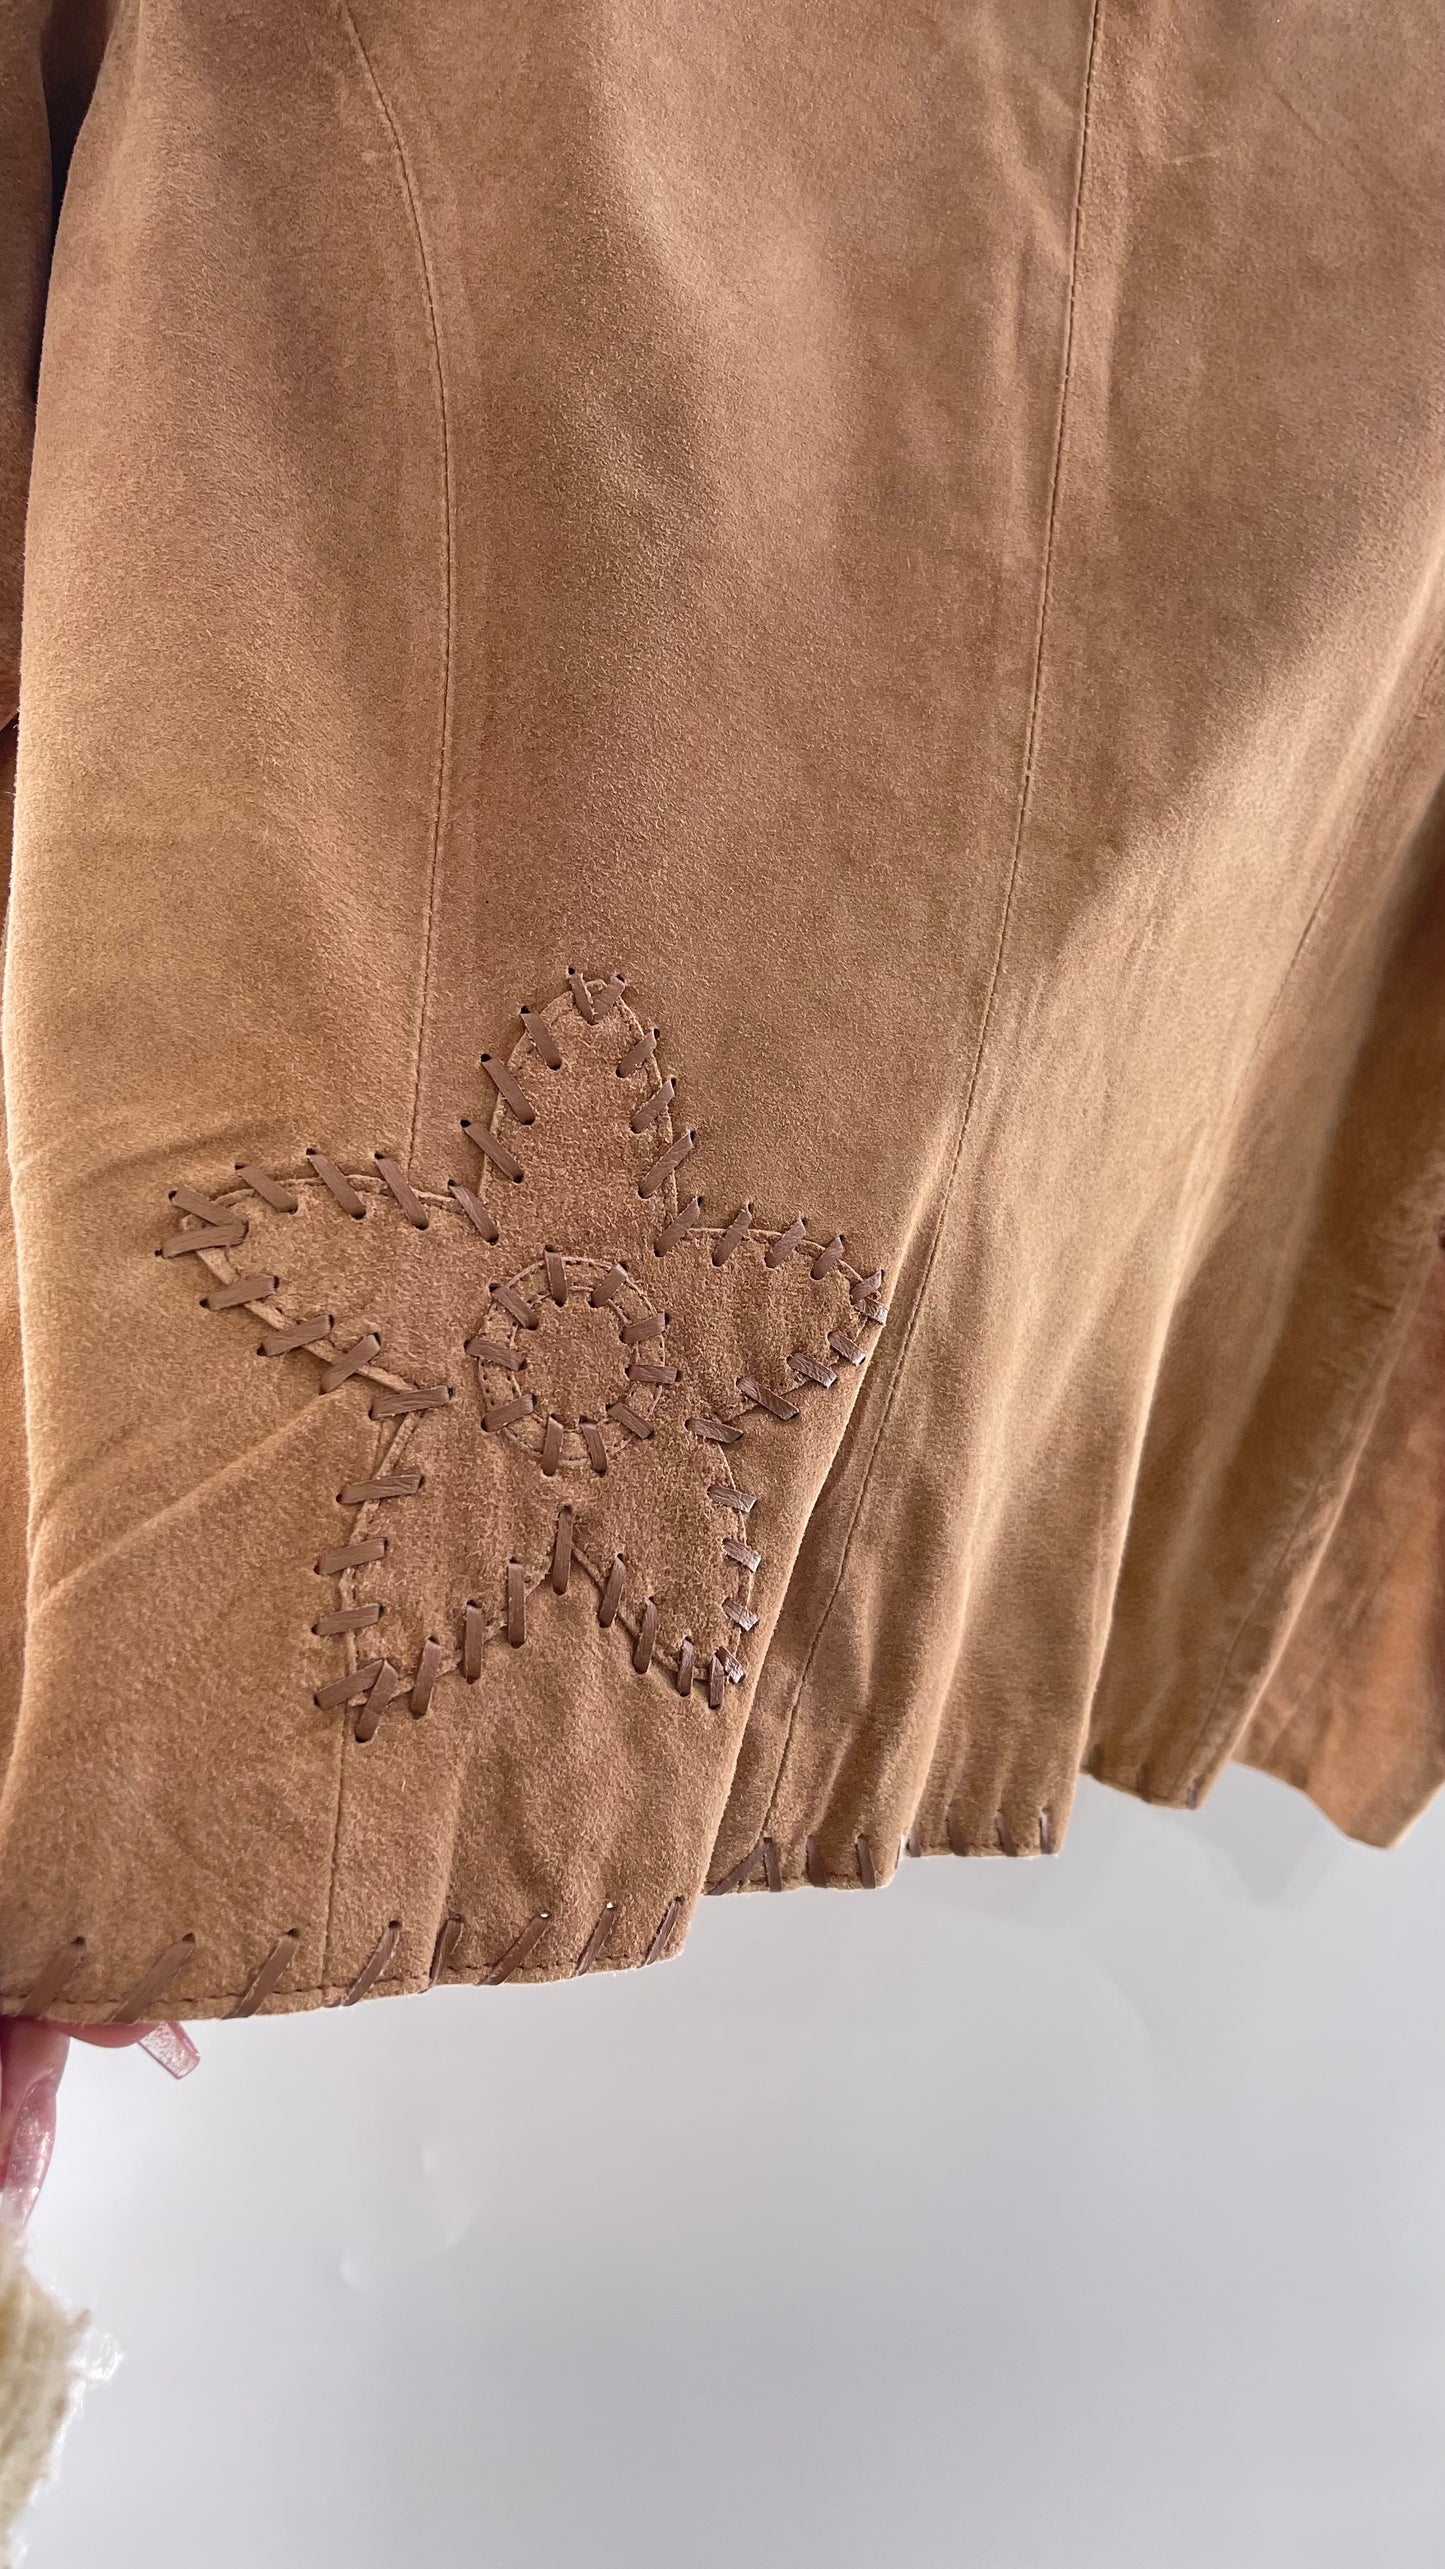 Vintage Rare Light Brown Genuine Suede Blazer with Embroidered Suede Flower and Contrasting Thick Leather Stitching (Medium)